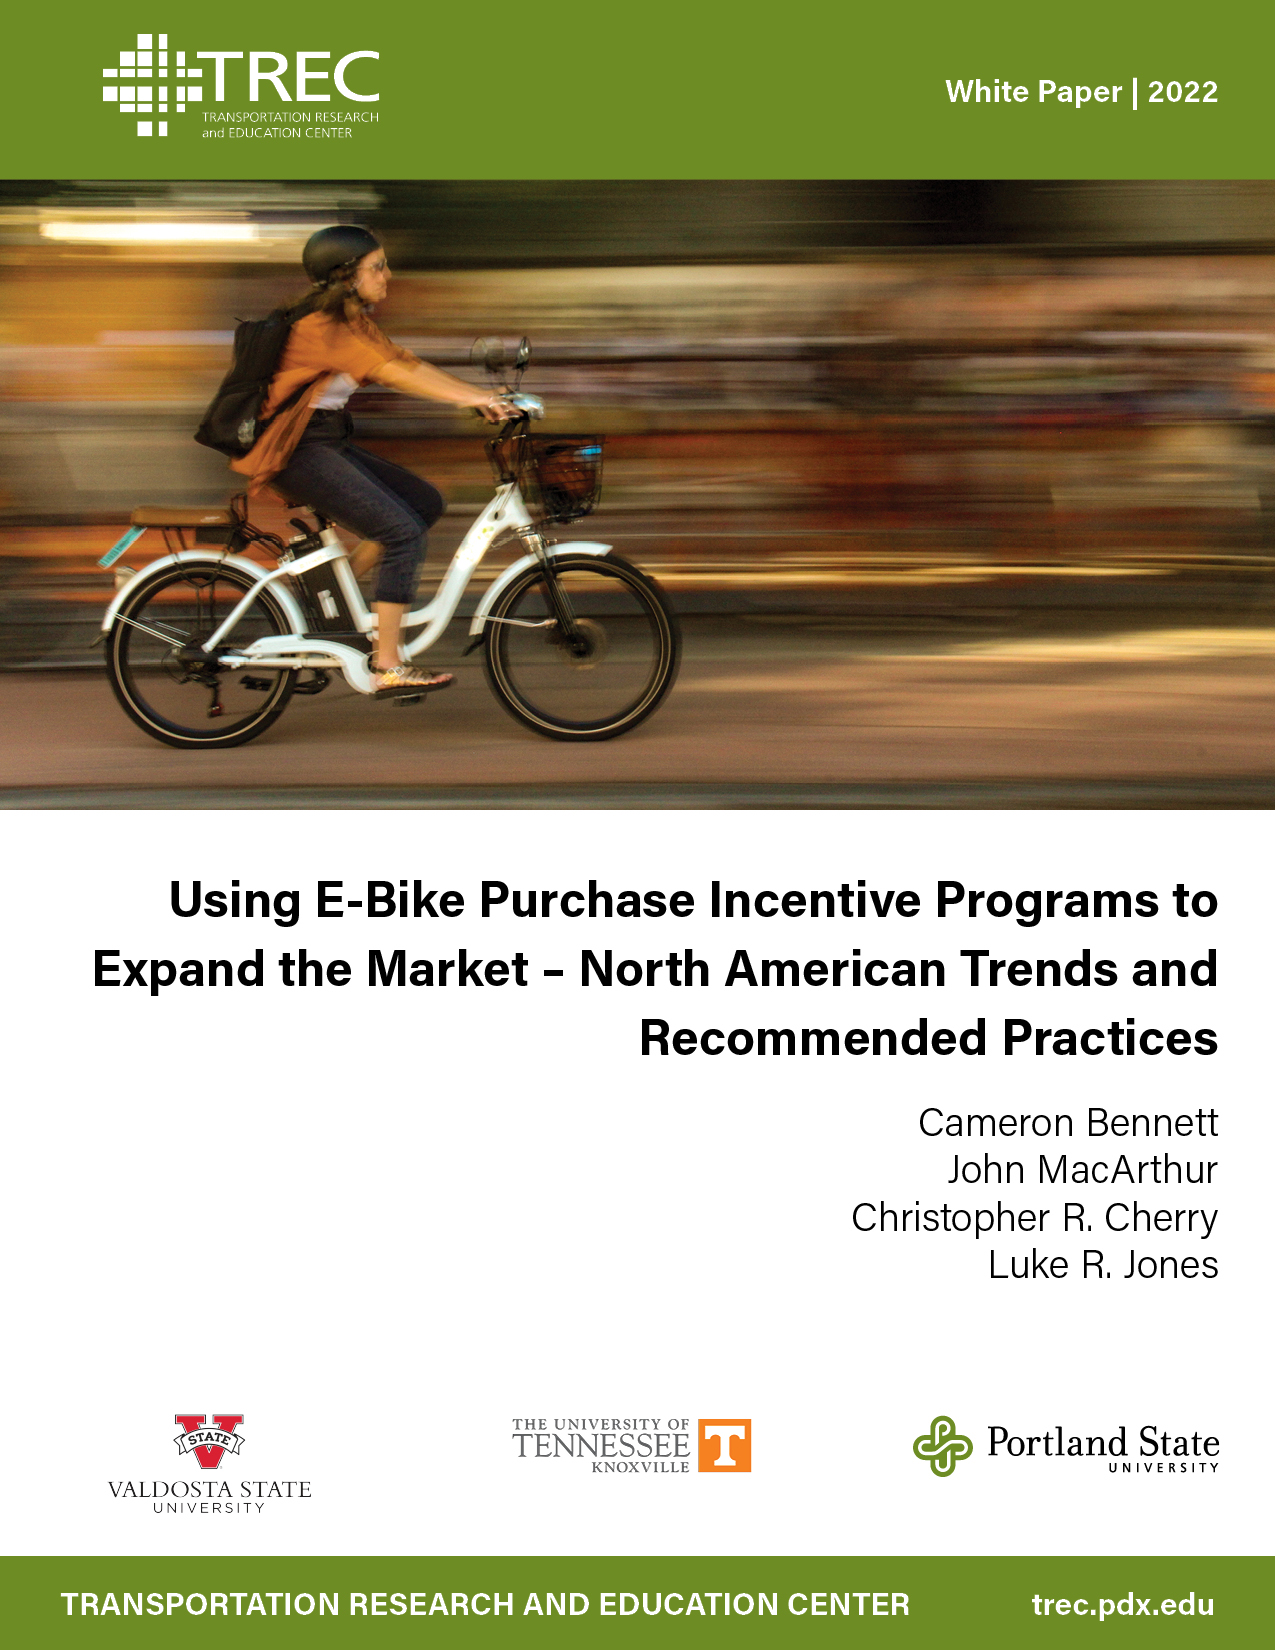 Using E-Bike Purchase Incentive Programs to Expand the Market – North American Trends and Recommended Practices 